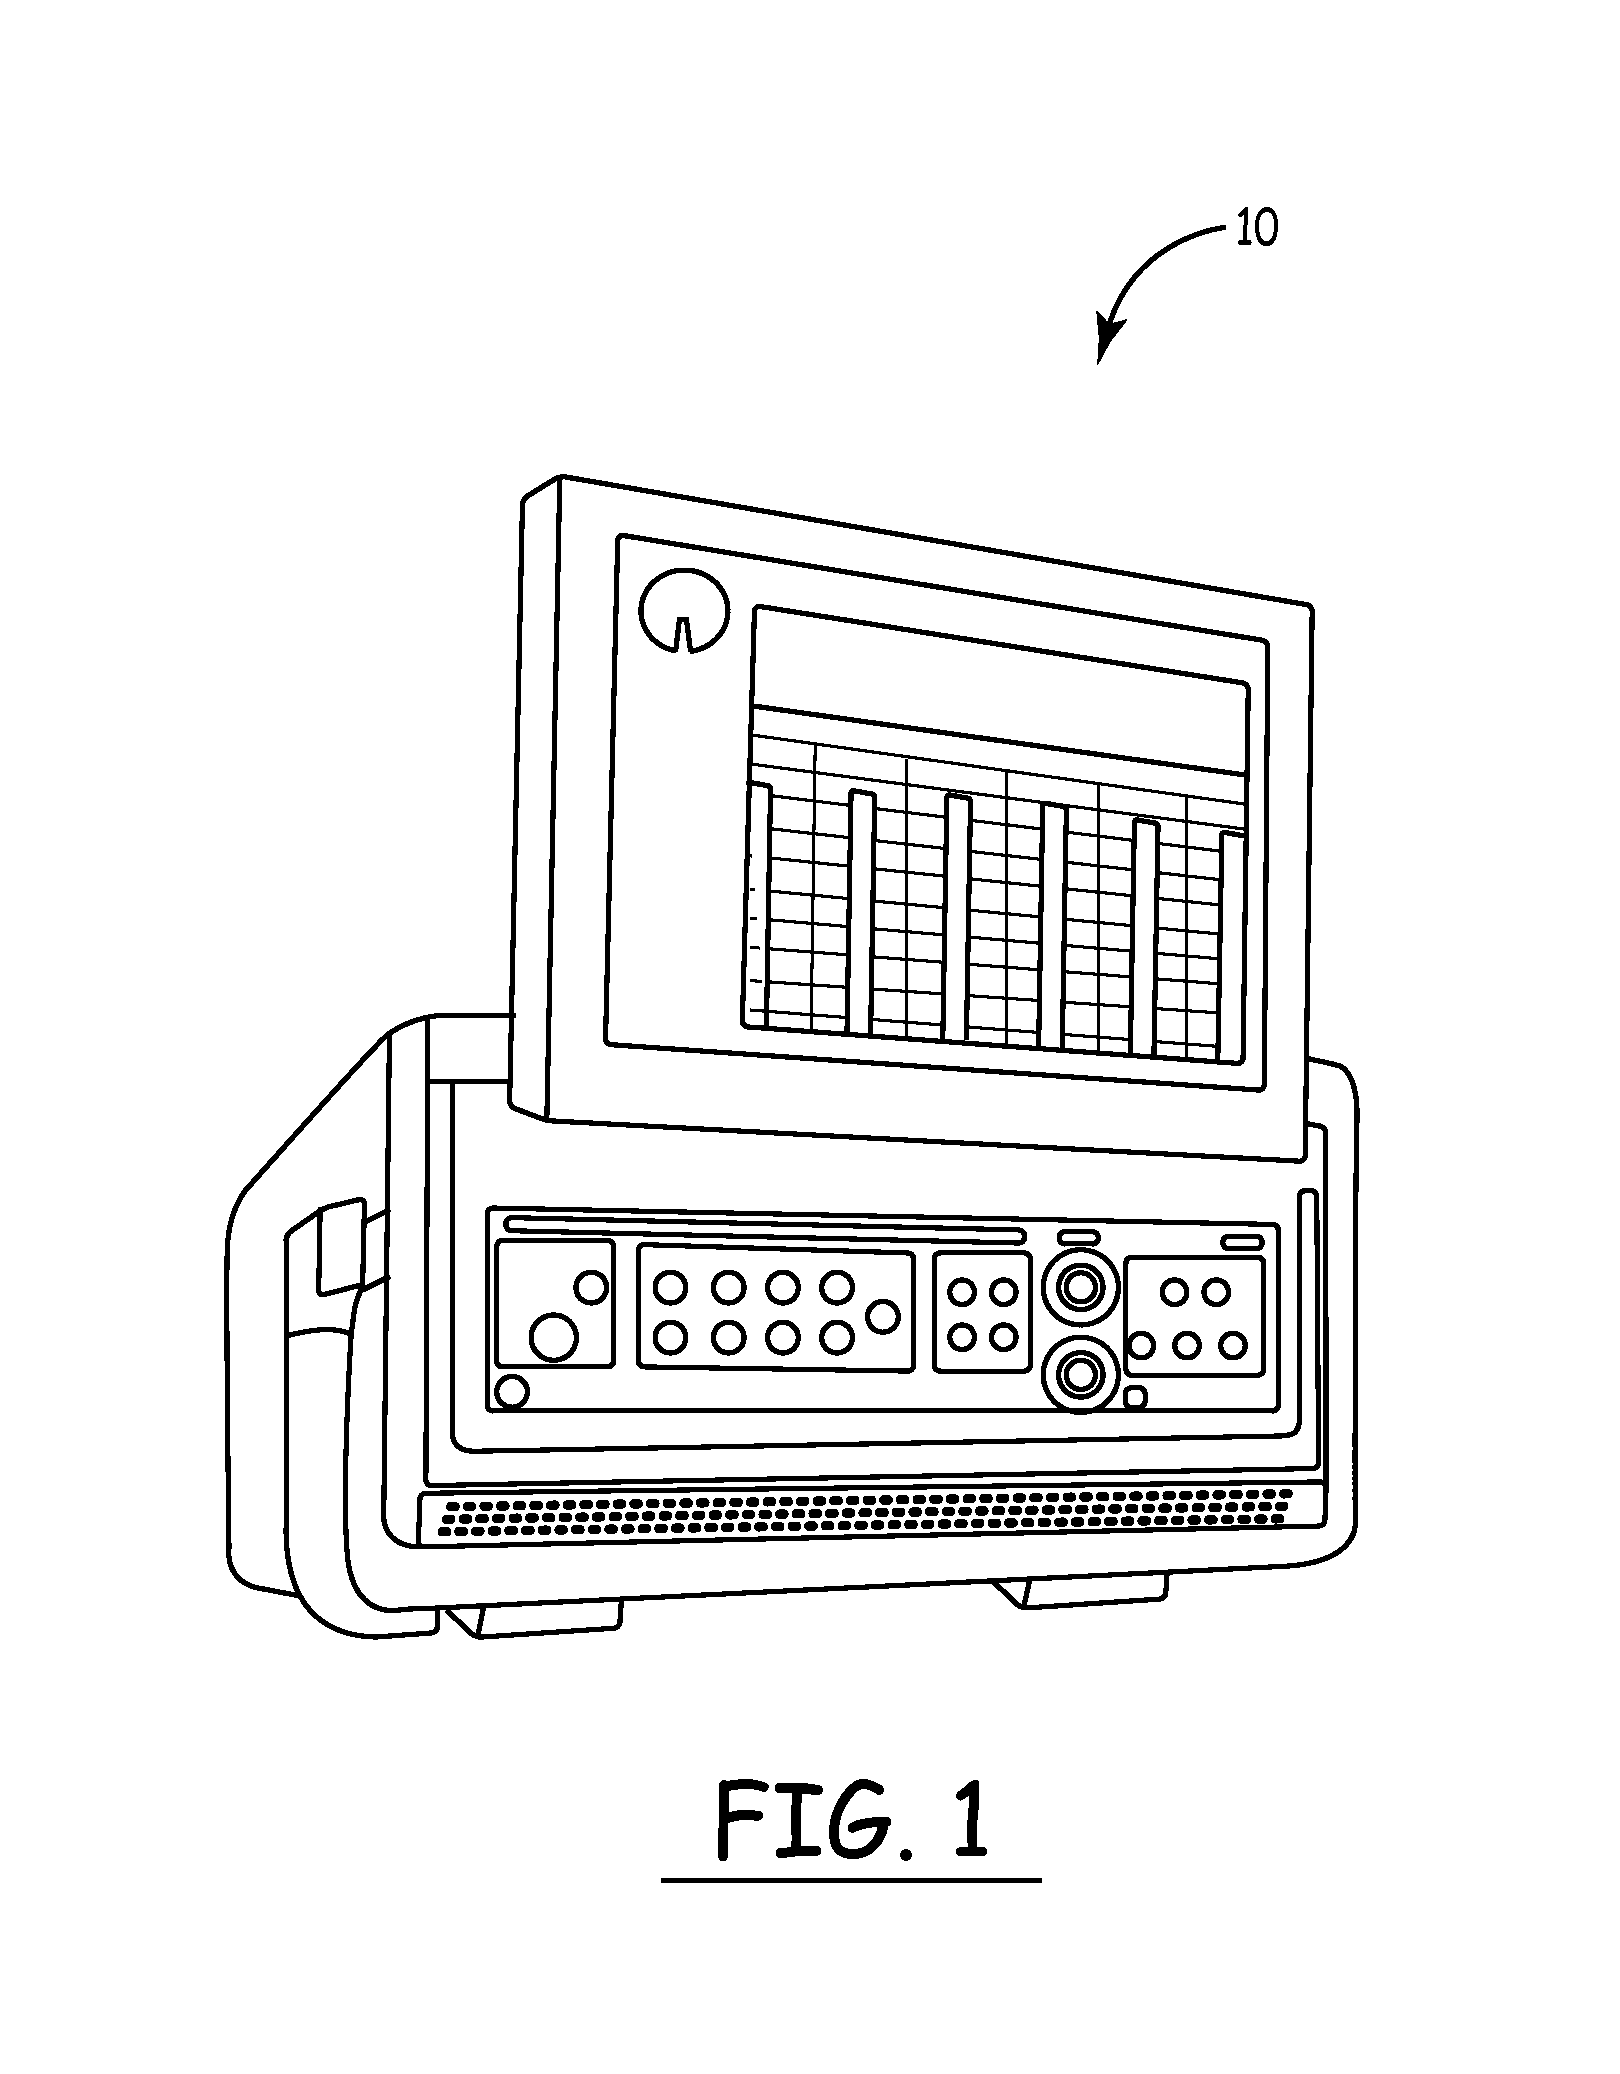 System and Method for Adaptive RF Ablation